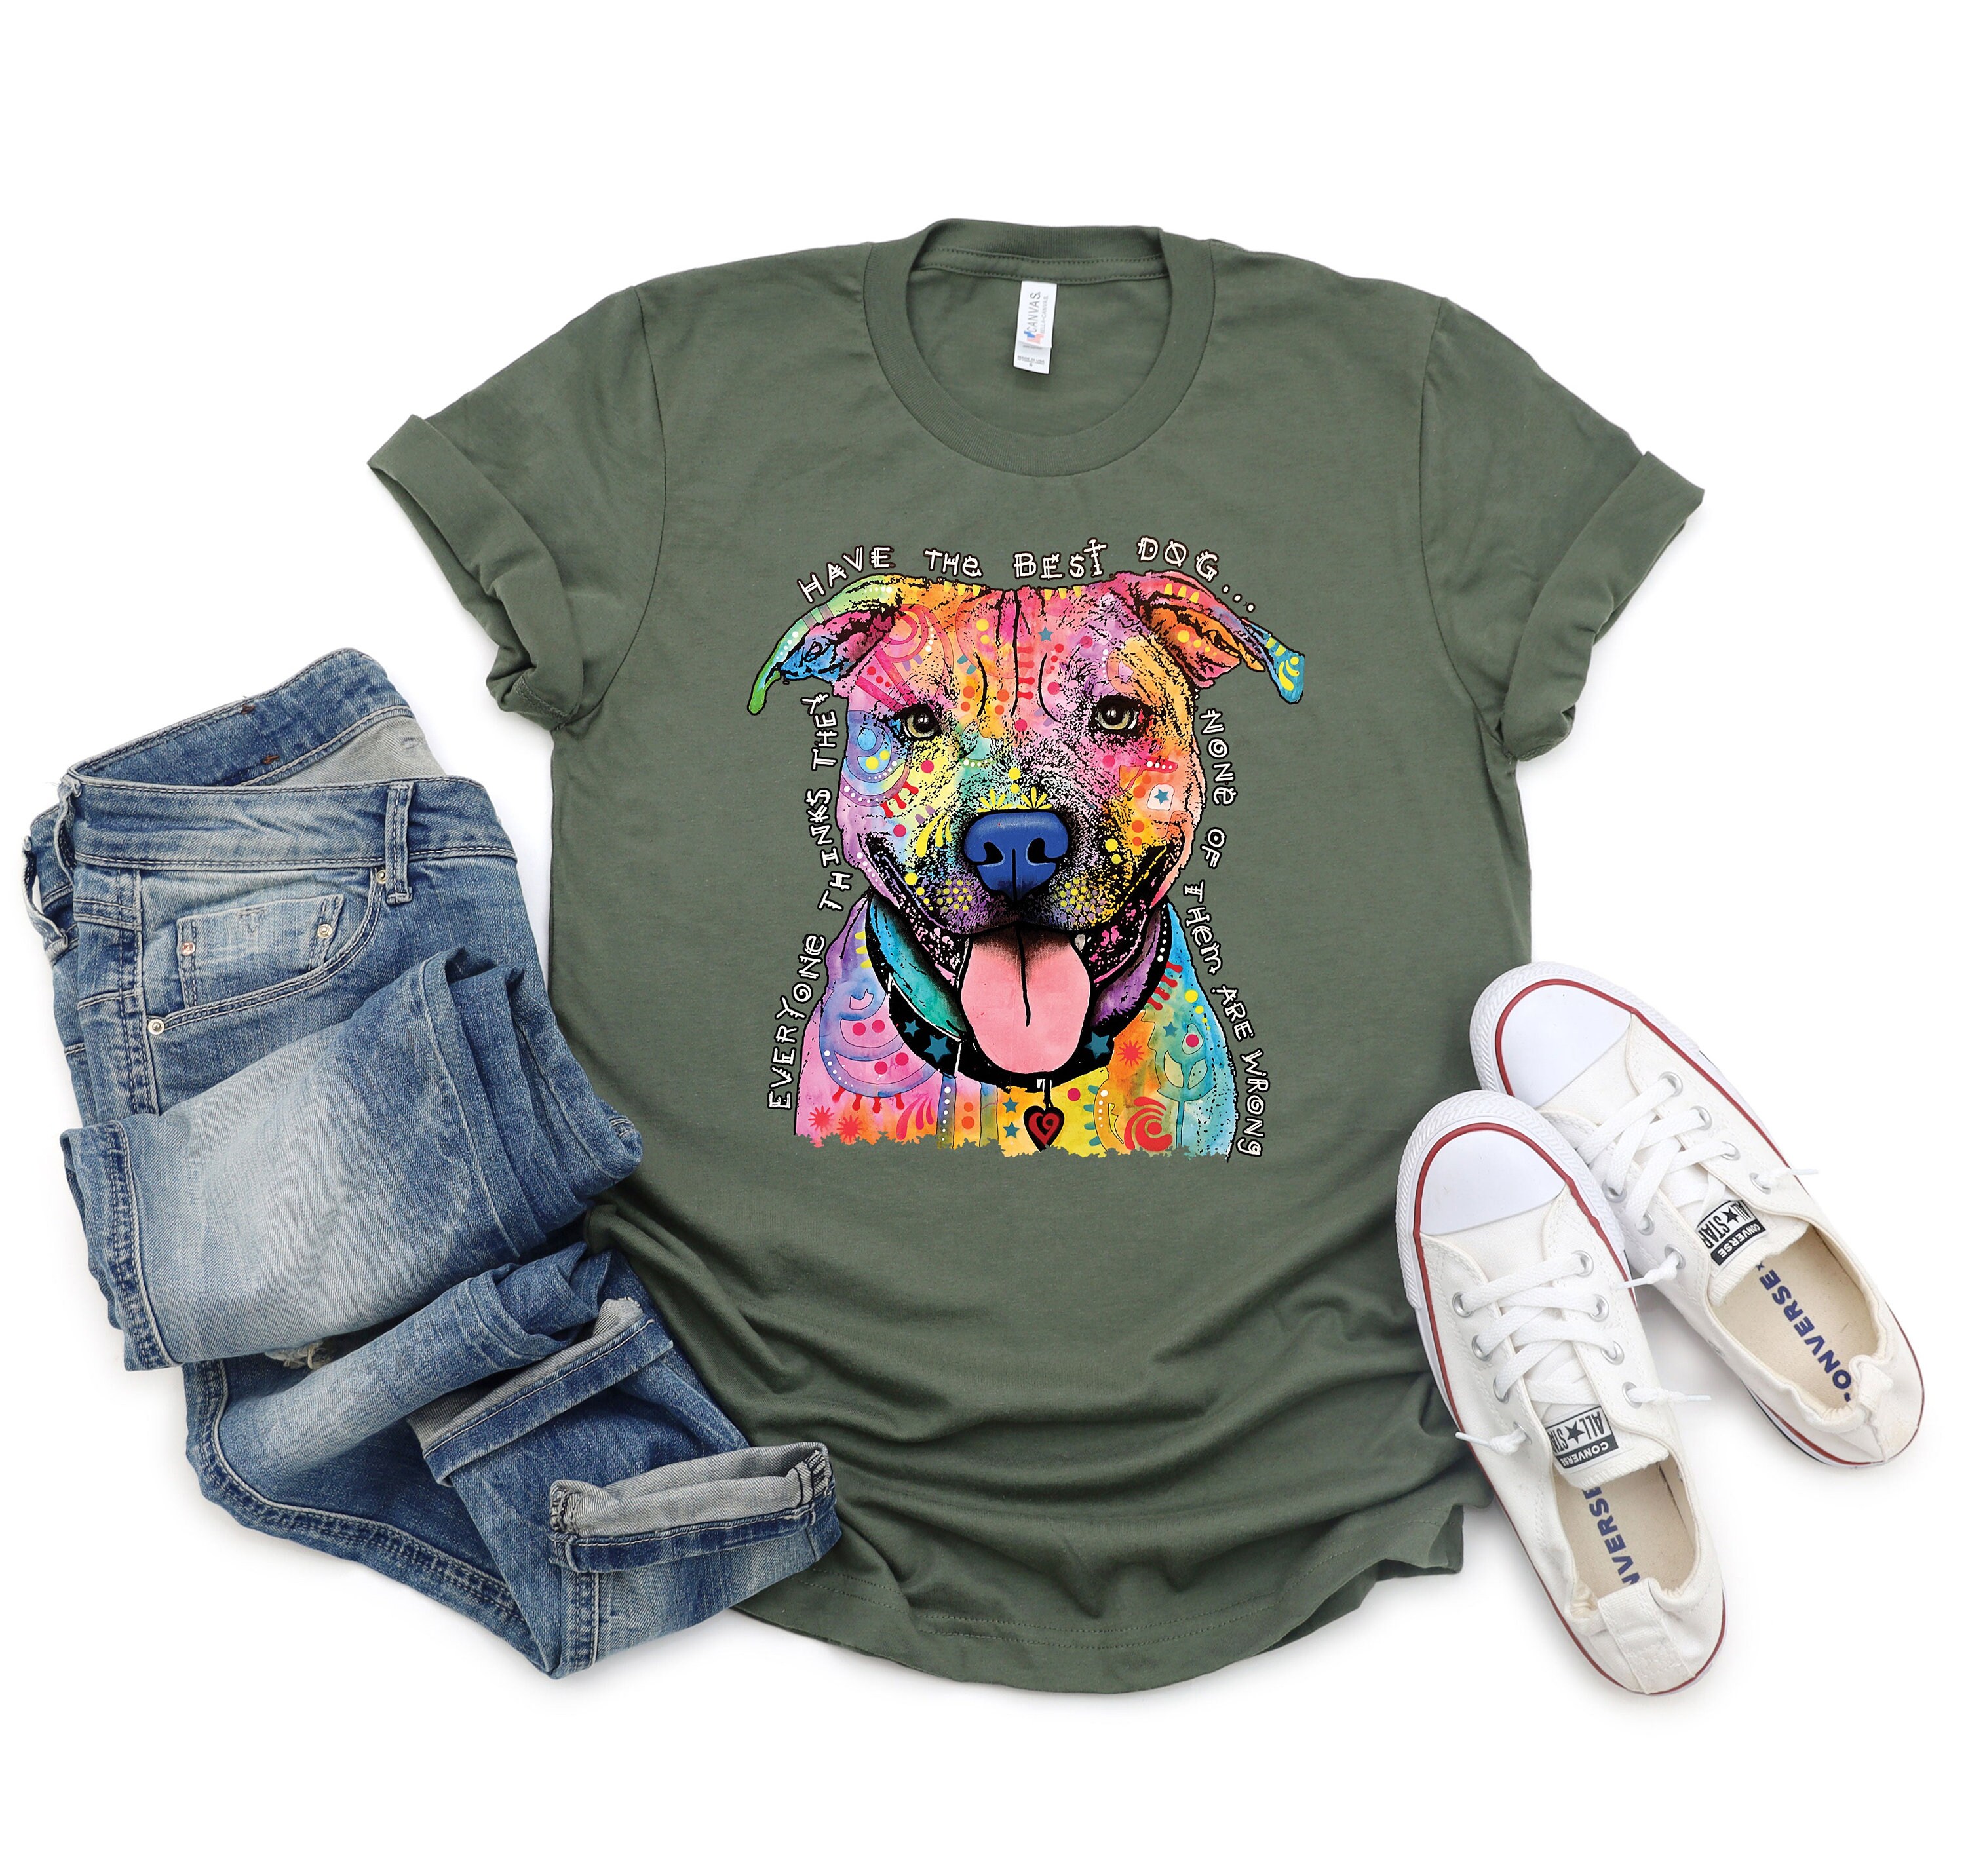 Buy Pit Bull T-shirt Neon Dog Breed Tee Dean Russo Shirt Online in